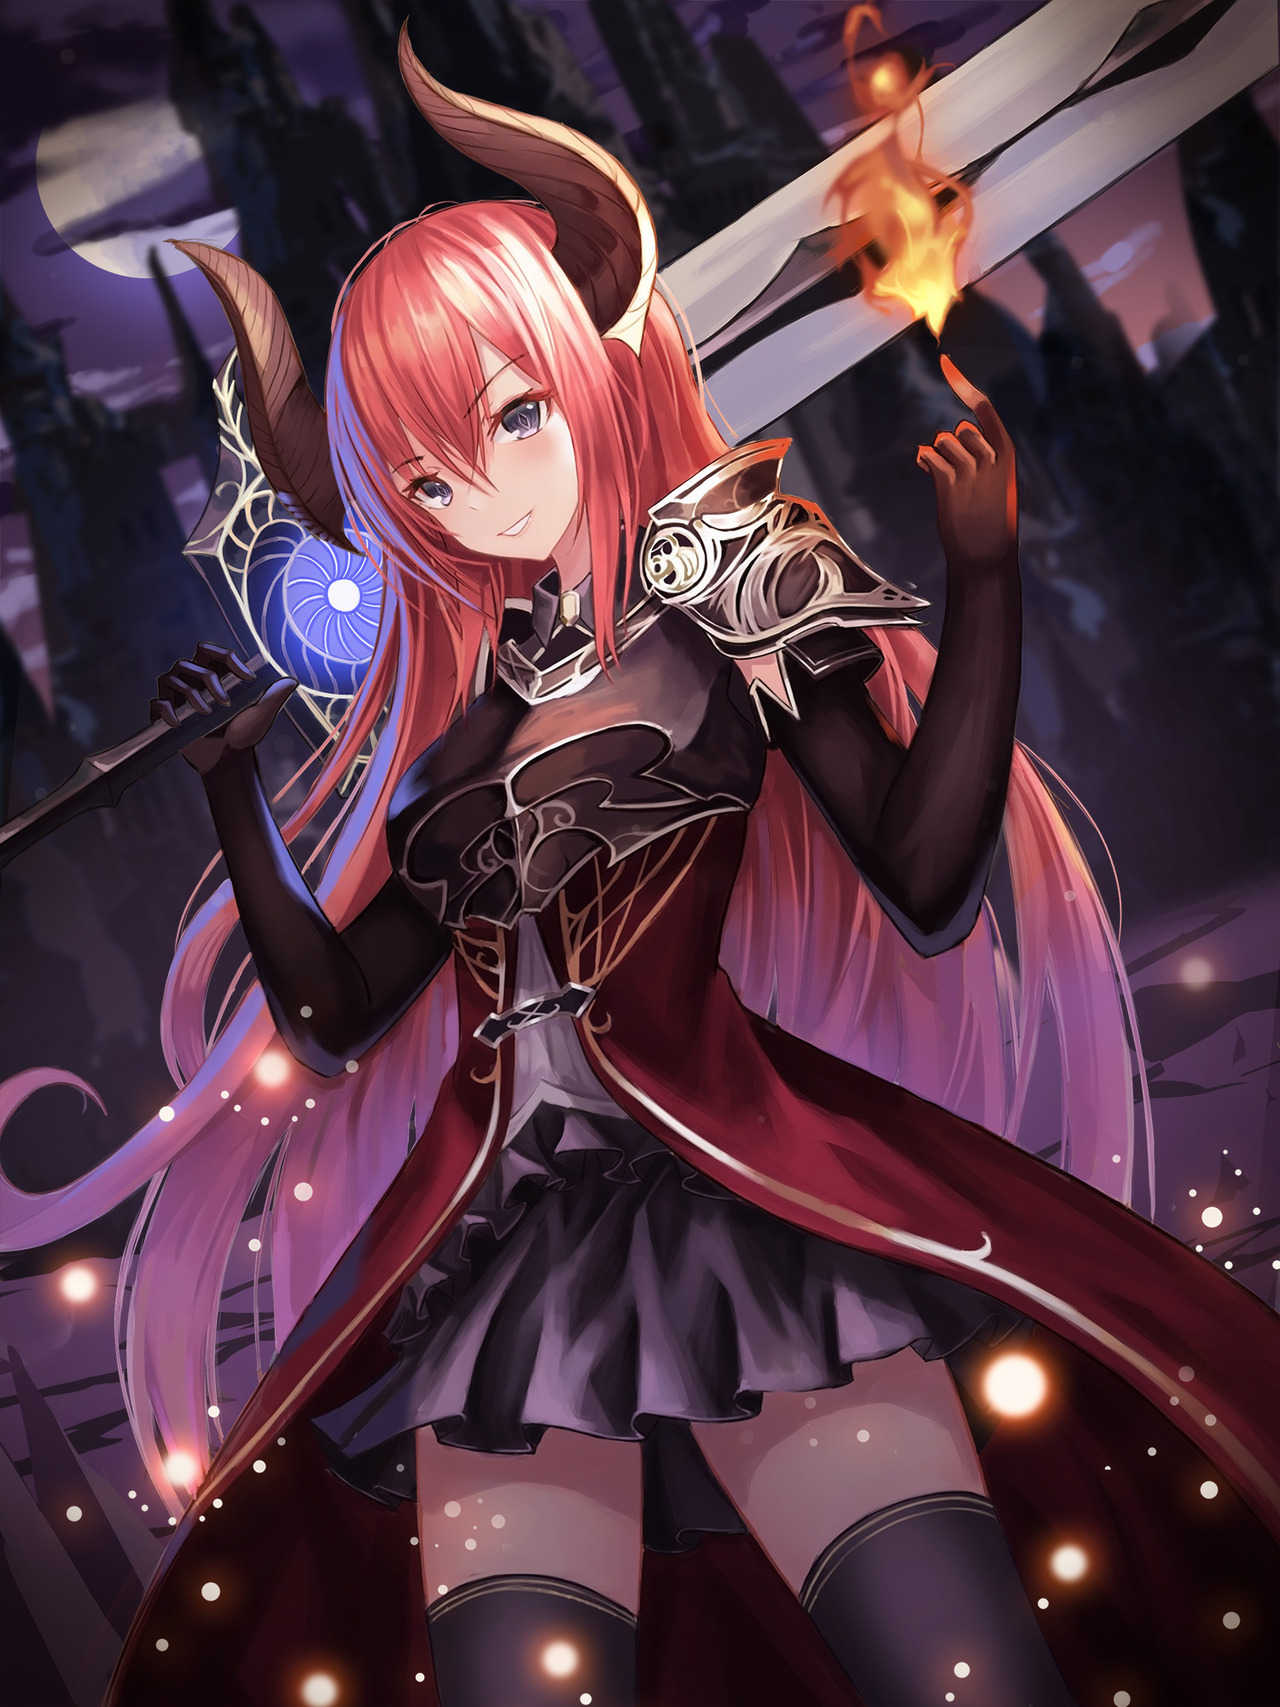 Demon girl with sword: Original anime character (27 Oct 2018)｜Random  Anime Arts [rARTs]: Collection of anime pictures